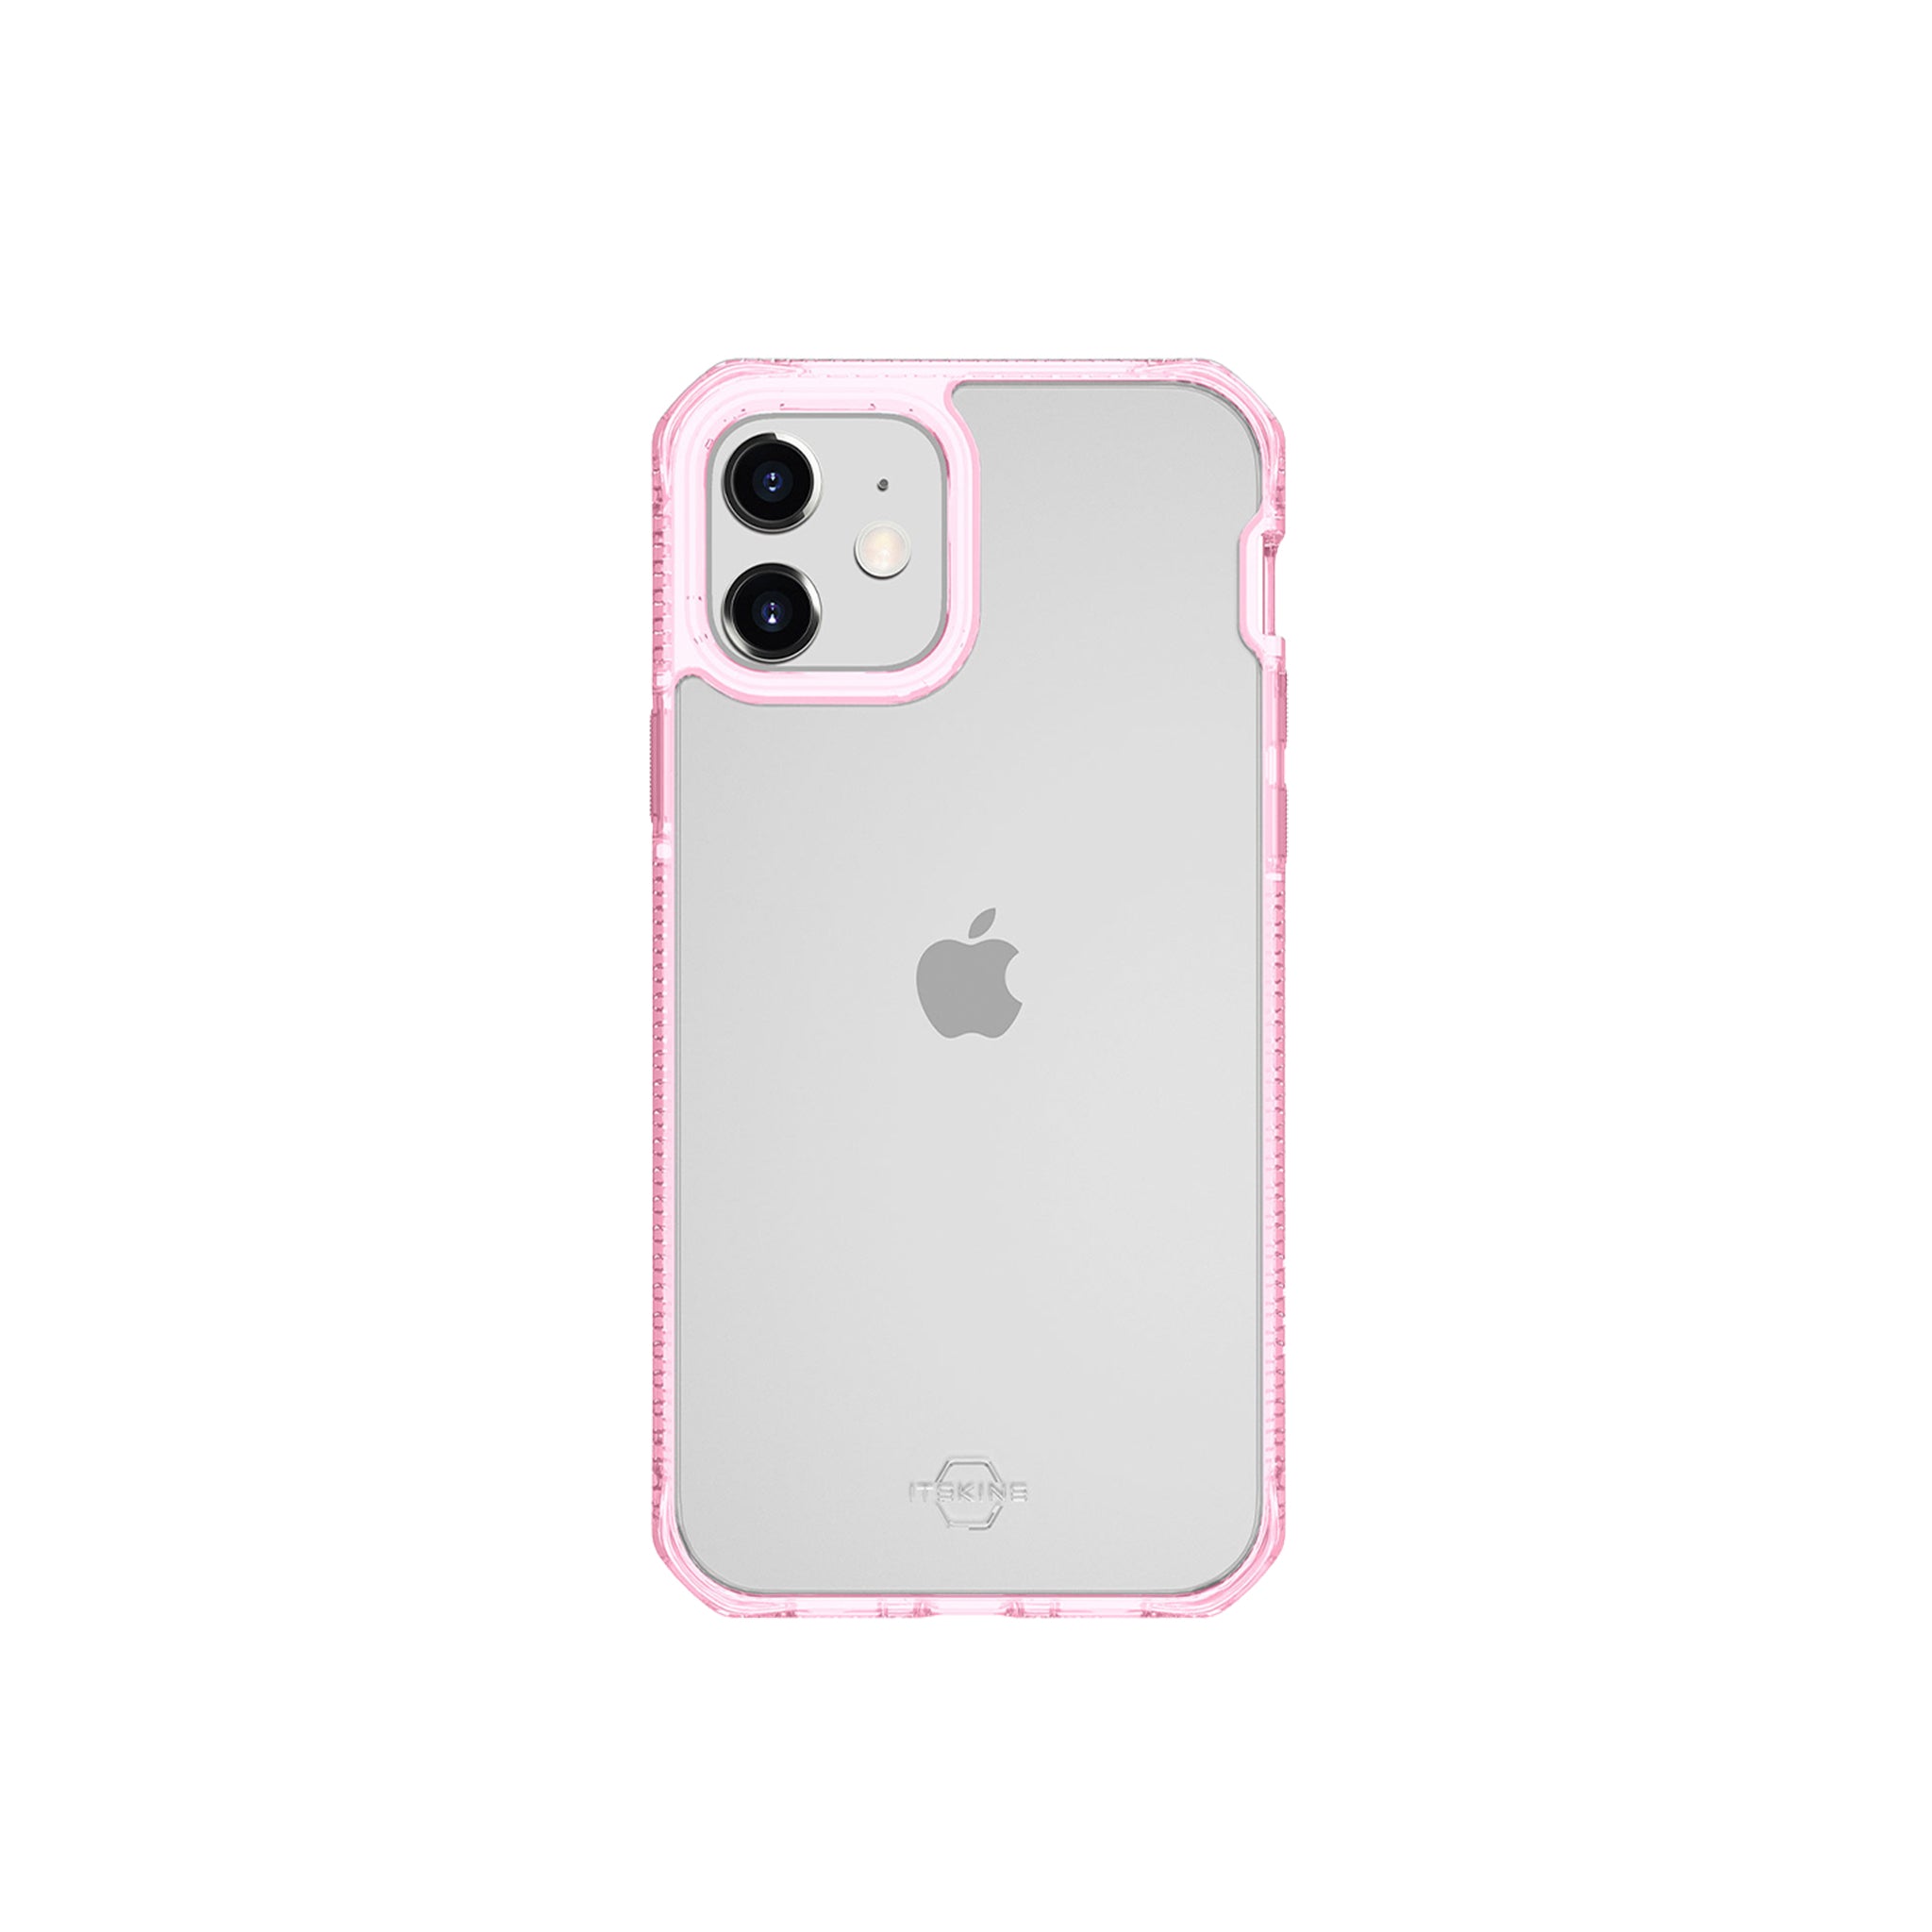 Itskins - Hybrid Clear Case For Apple Iphone 12 Mini - Light Pink And Transparent